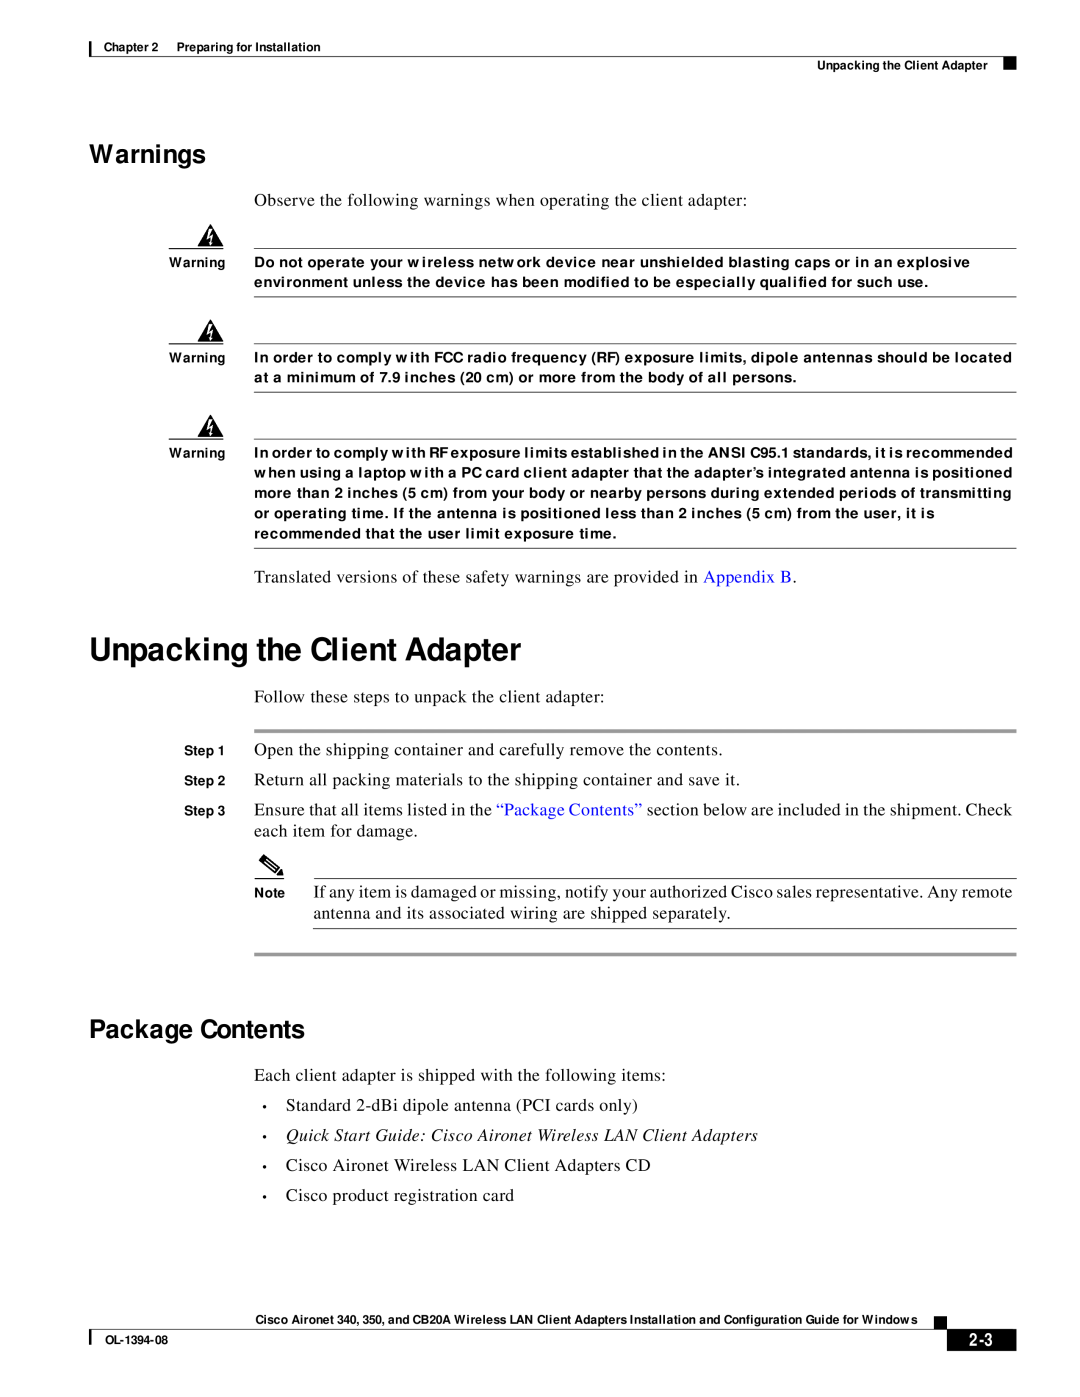 Cisco Systems CB20A, 350 manual Unpacking the Client Adapter, Warnings, Package Contents 